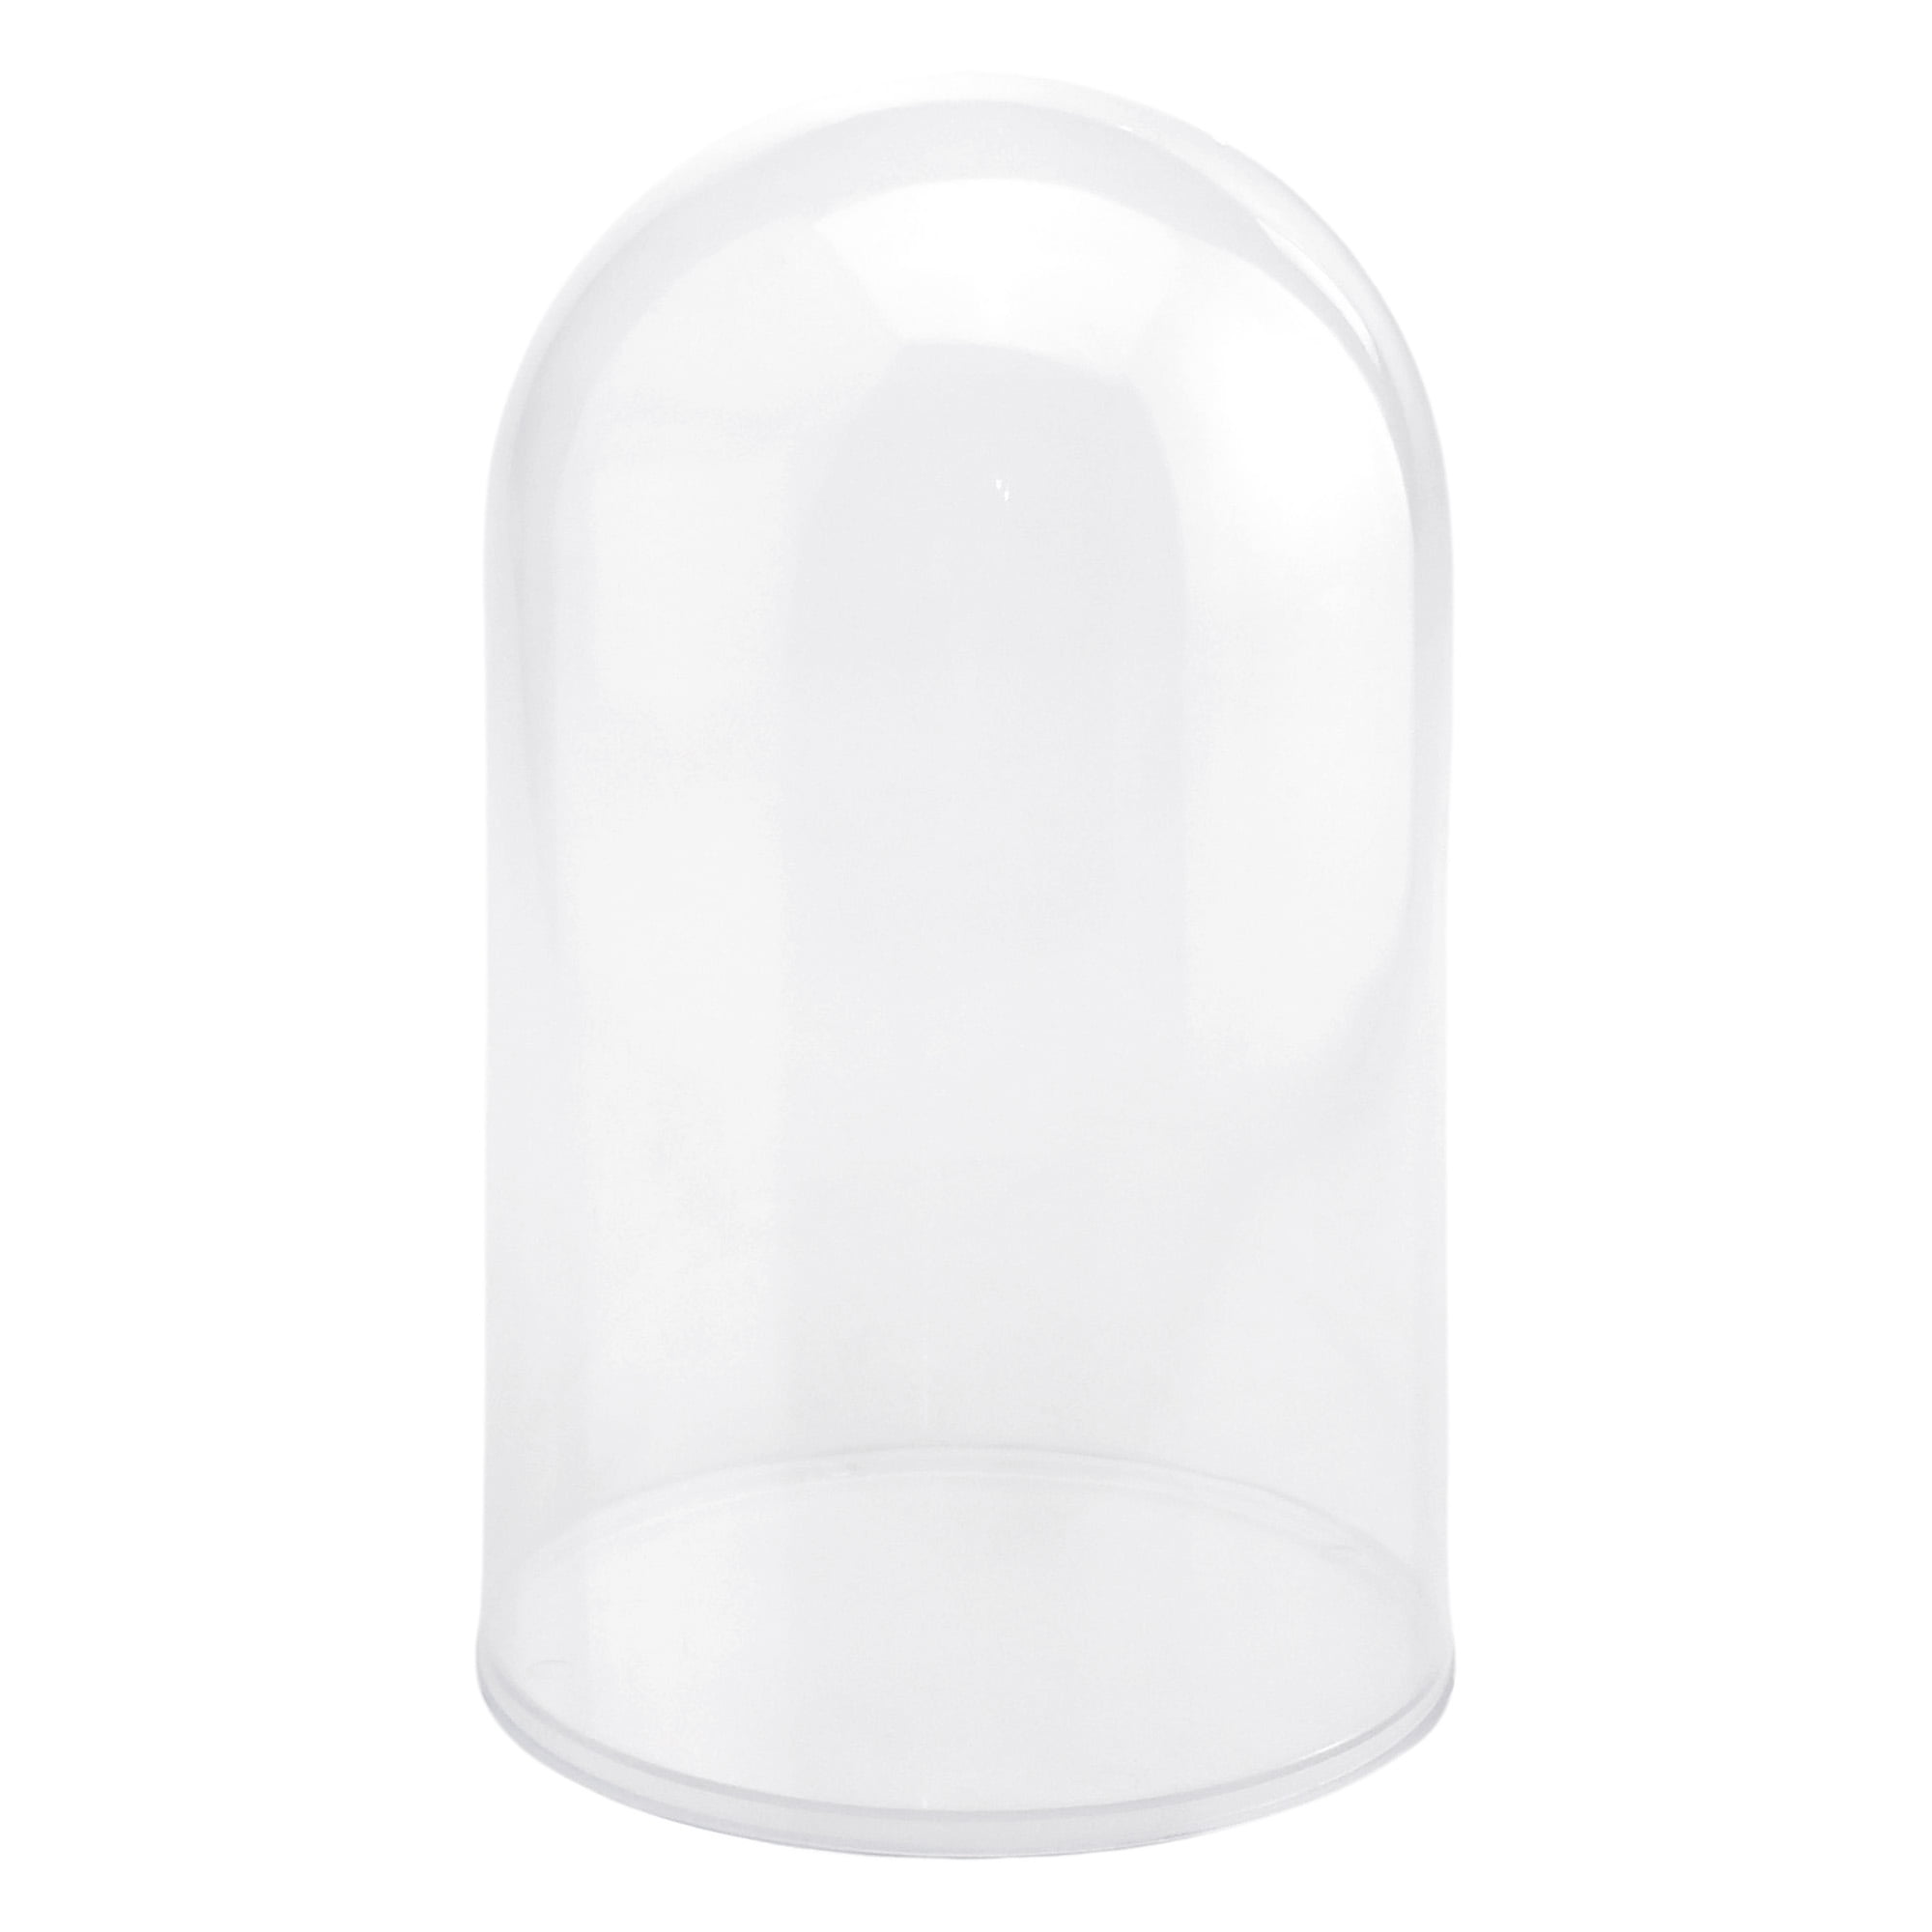 Plastic Dome Display with Clear Base, 8-1/2-Inch, X-Large